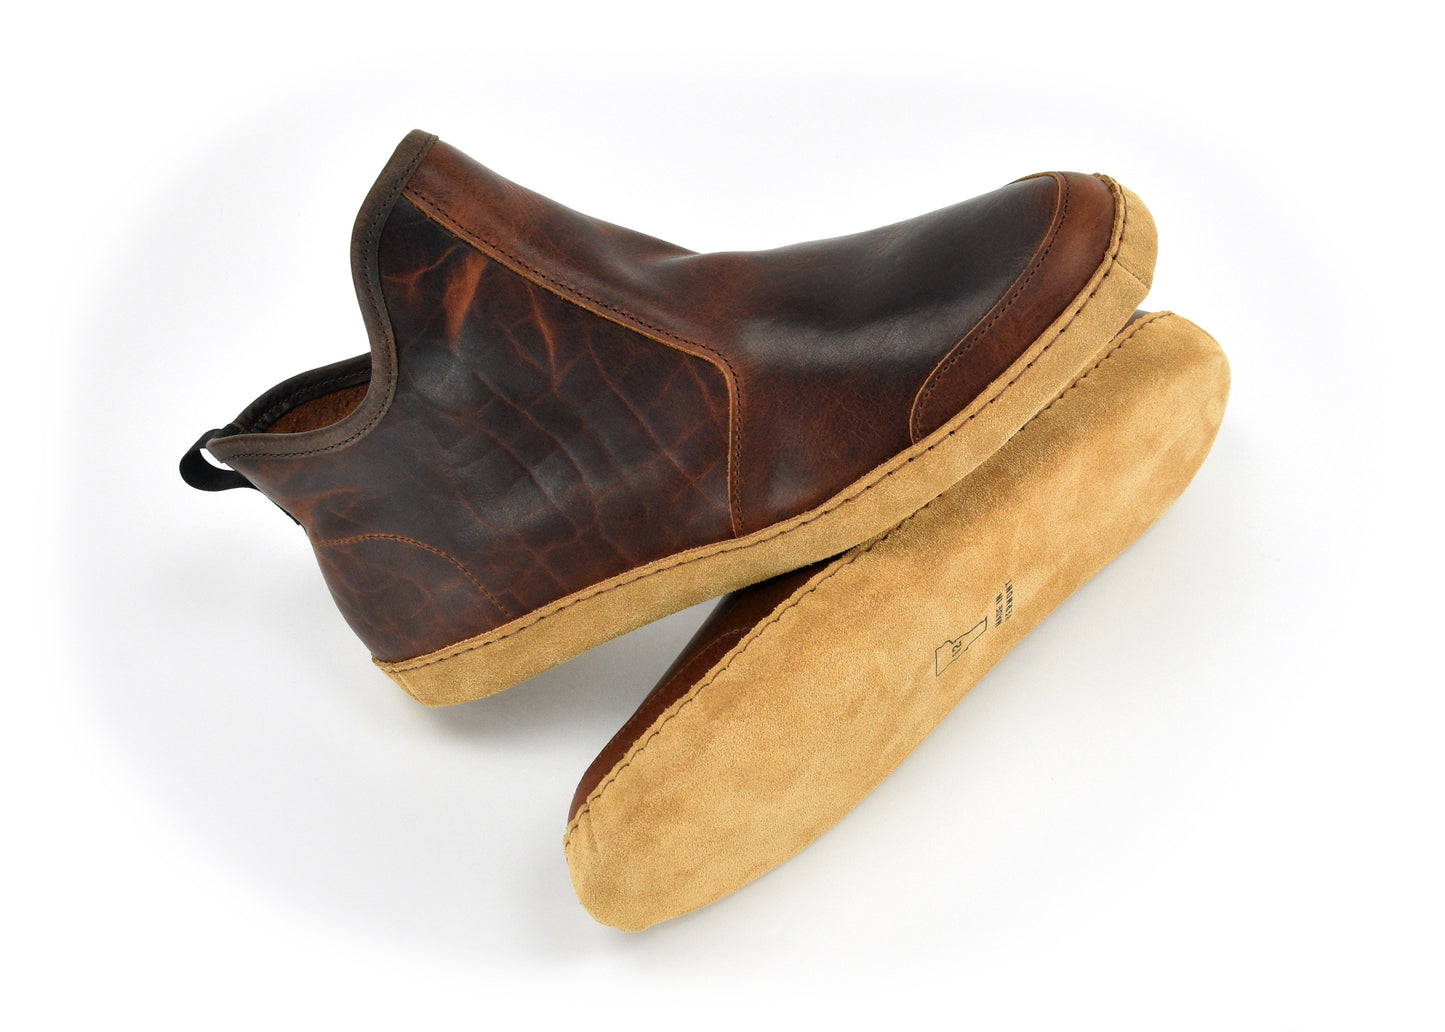 Vermont House Shoes - Hi-Top - Tobacco Bison side and bottom view